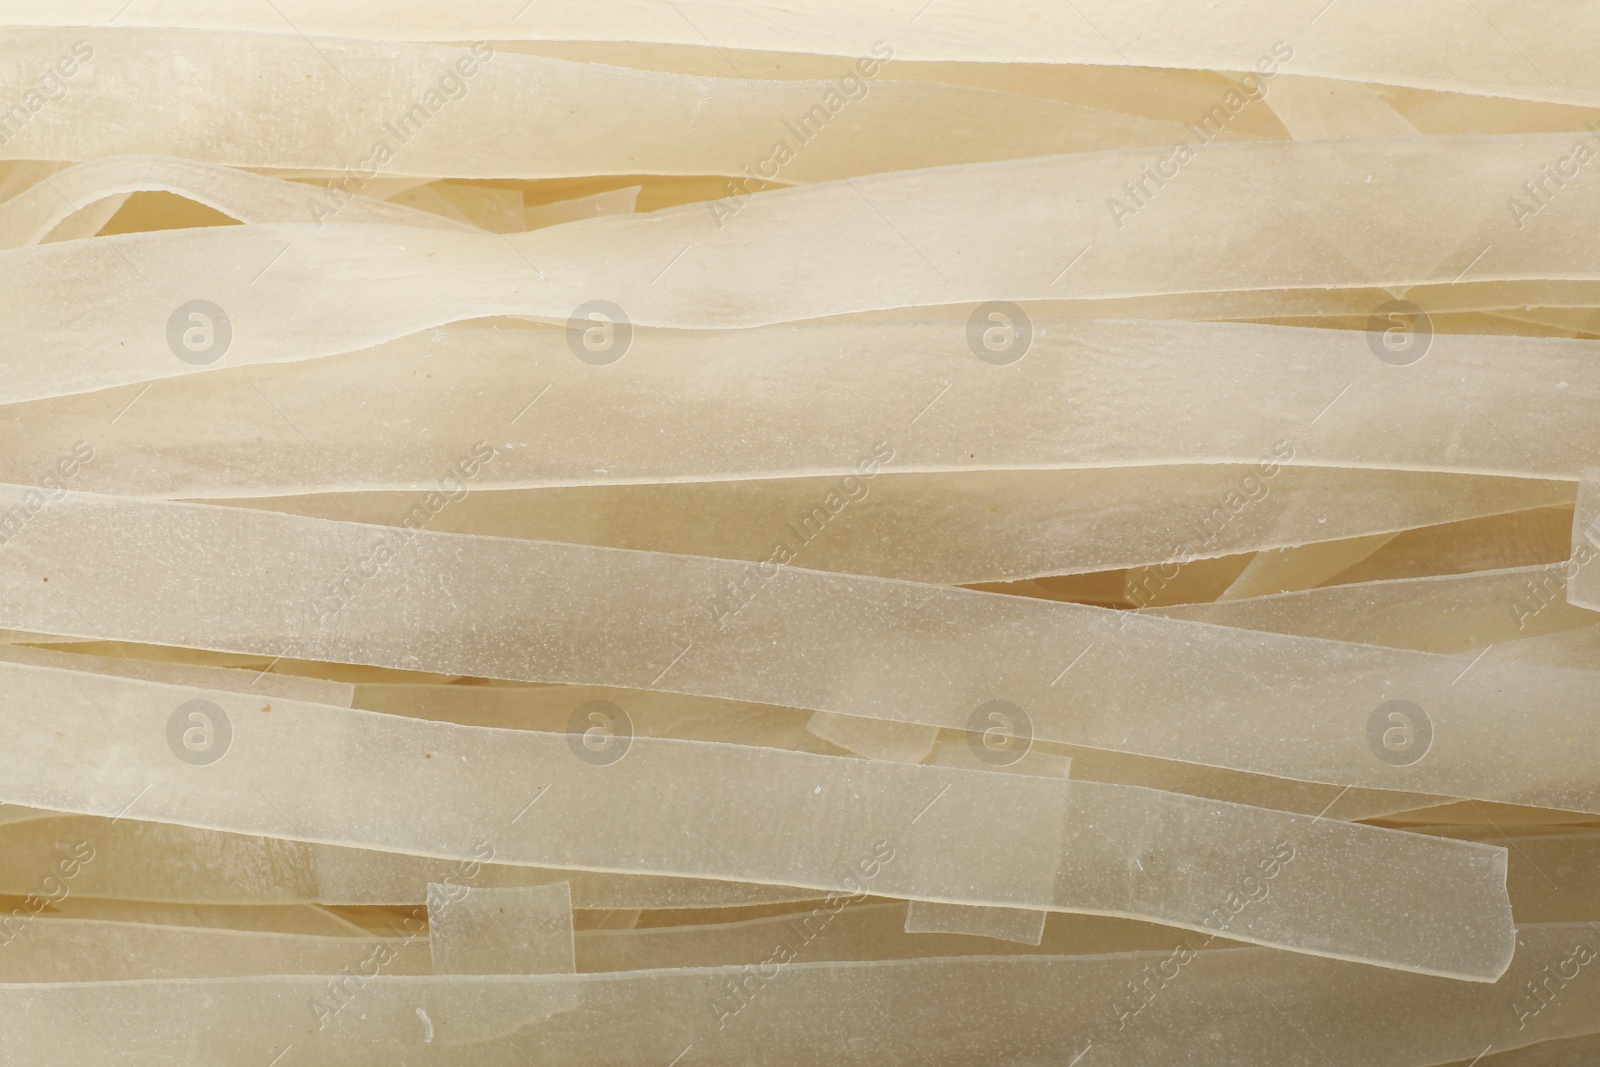 Photo of Raw rice noodles as background, closeup view